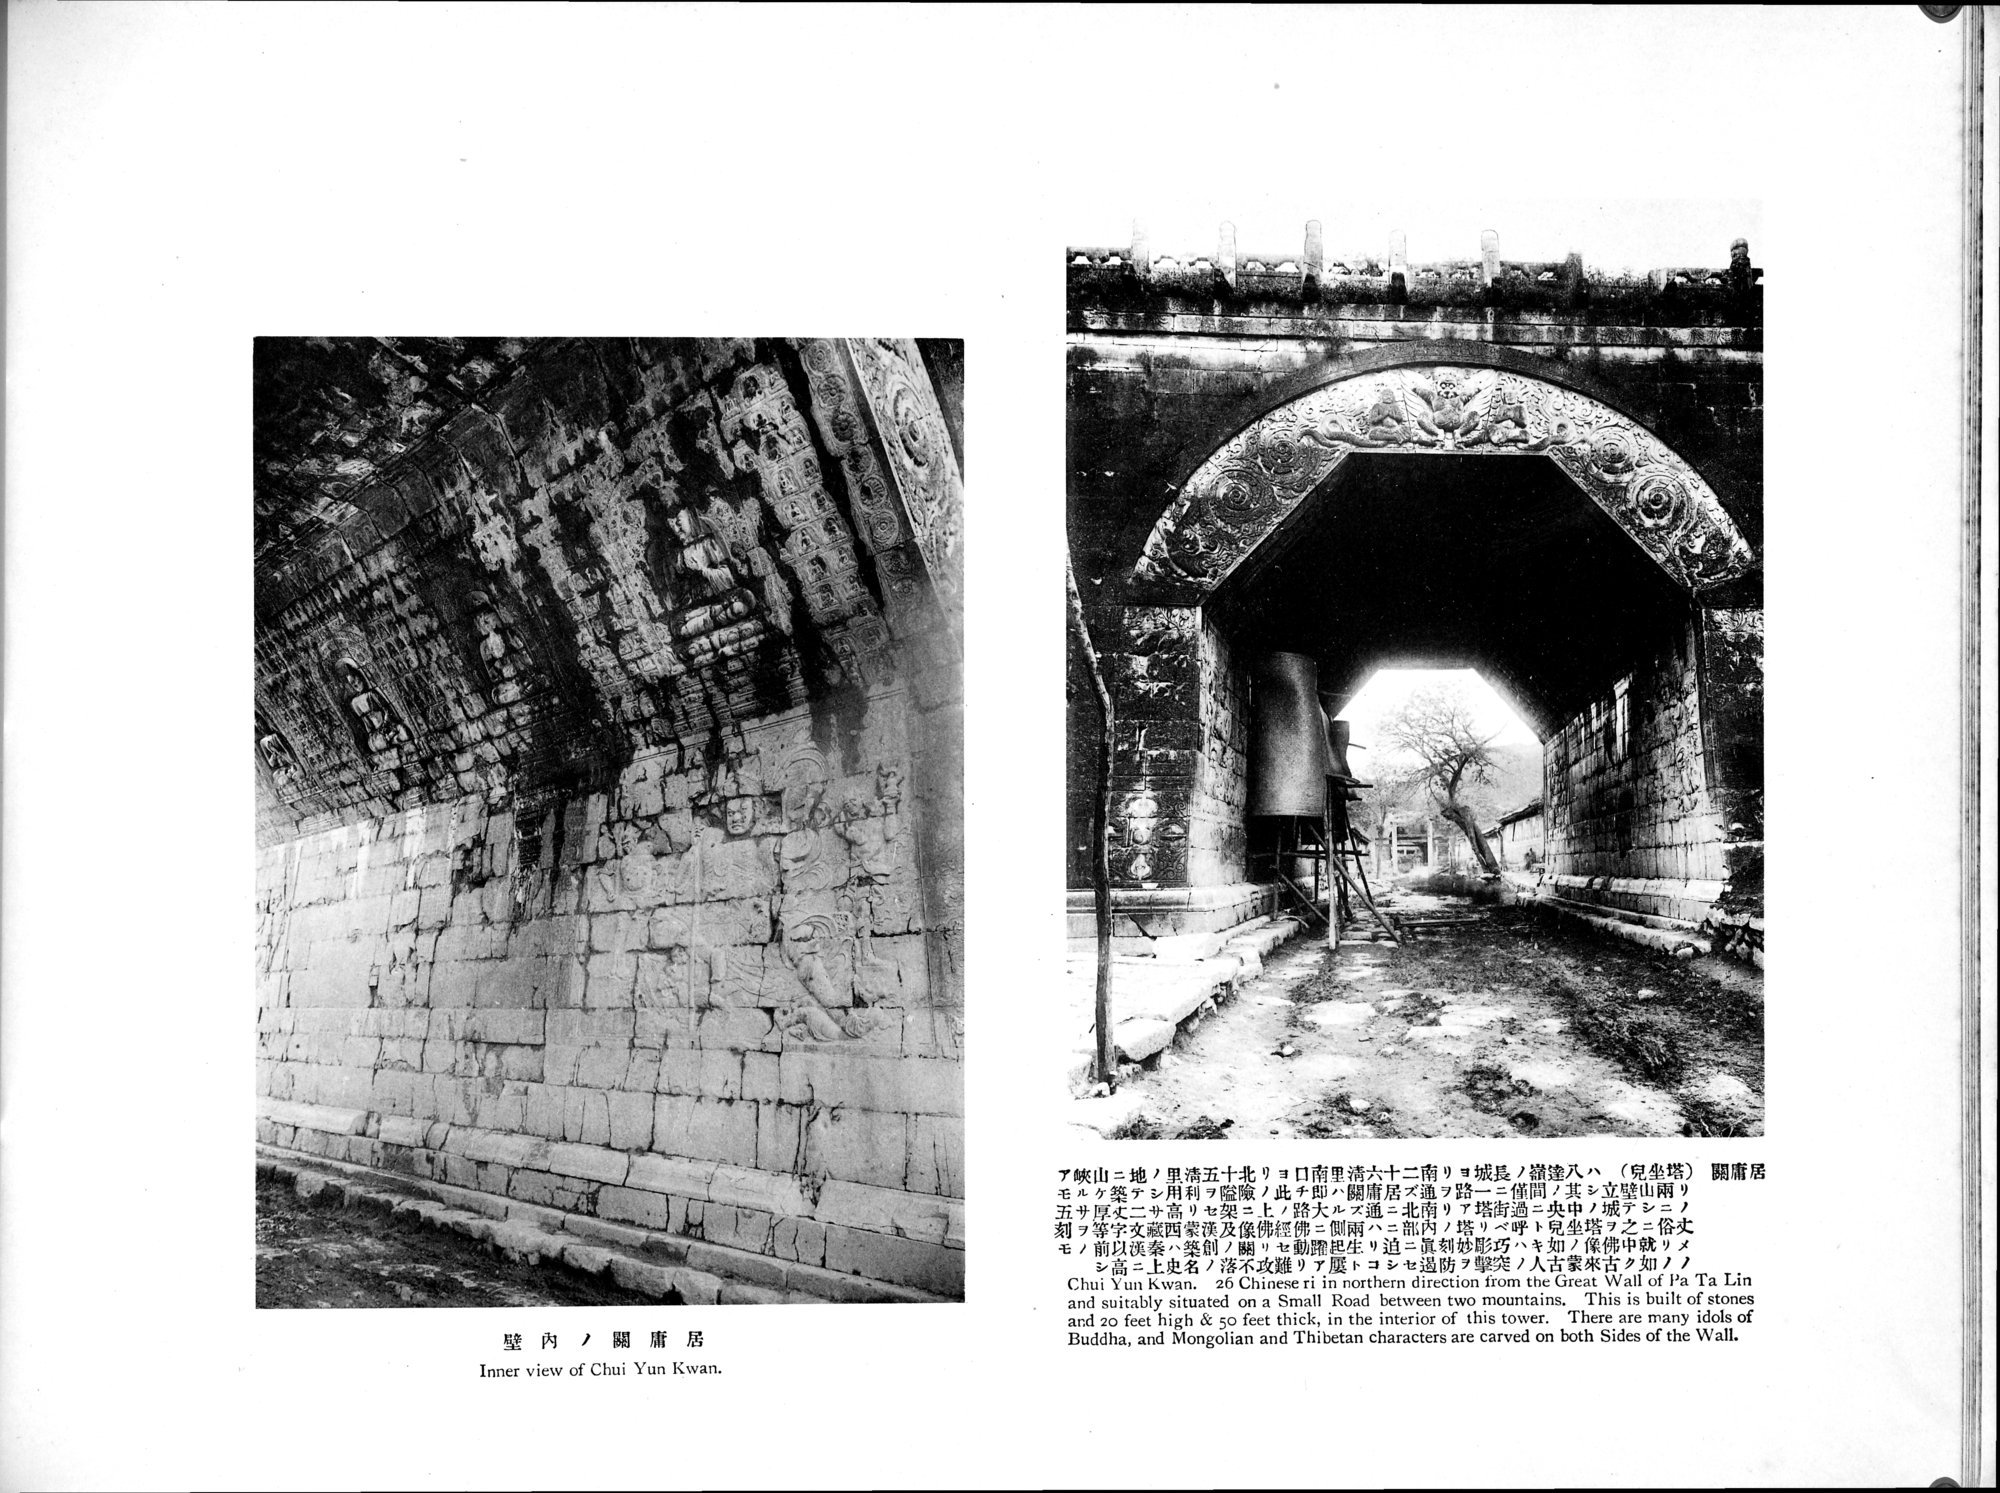 Views and Custom of North China : vol.1 / Page 187 (Grayscale High Resolution Image)